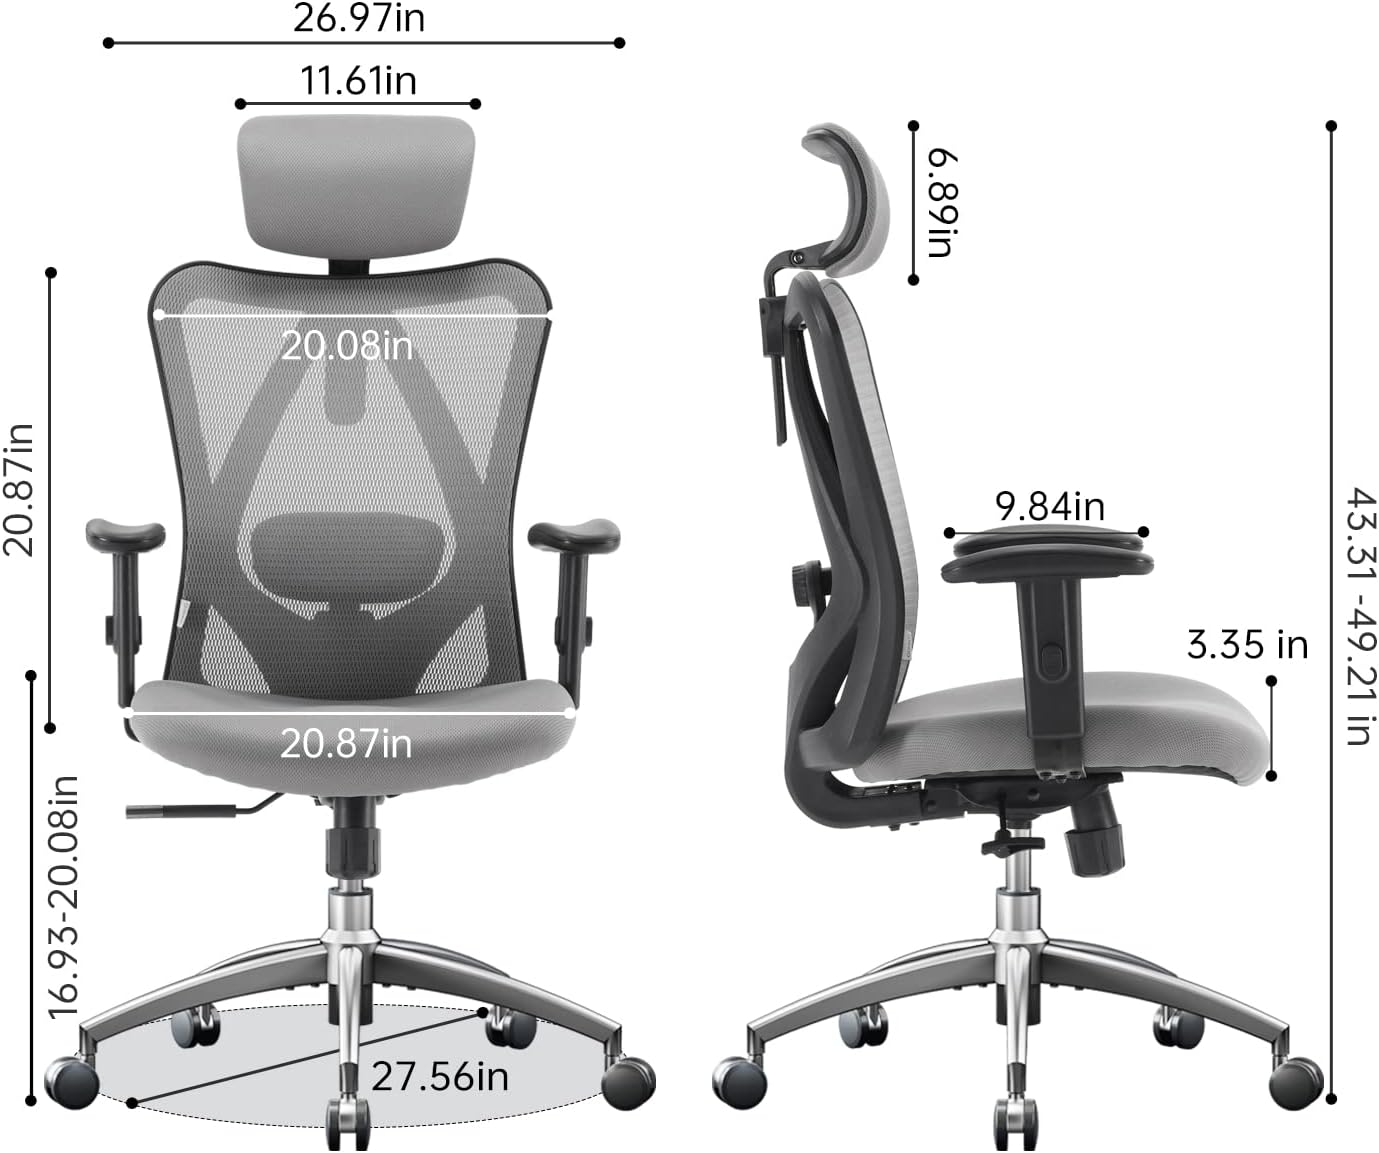 SIHOO M18 Ergonomic Office Chair for Big and Tall People